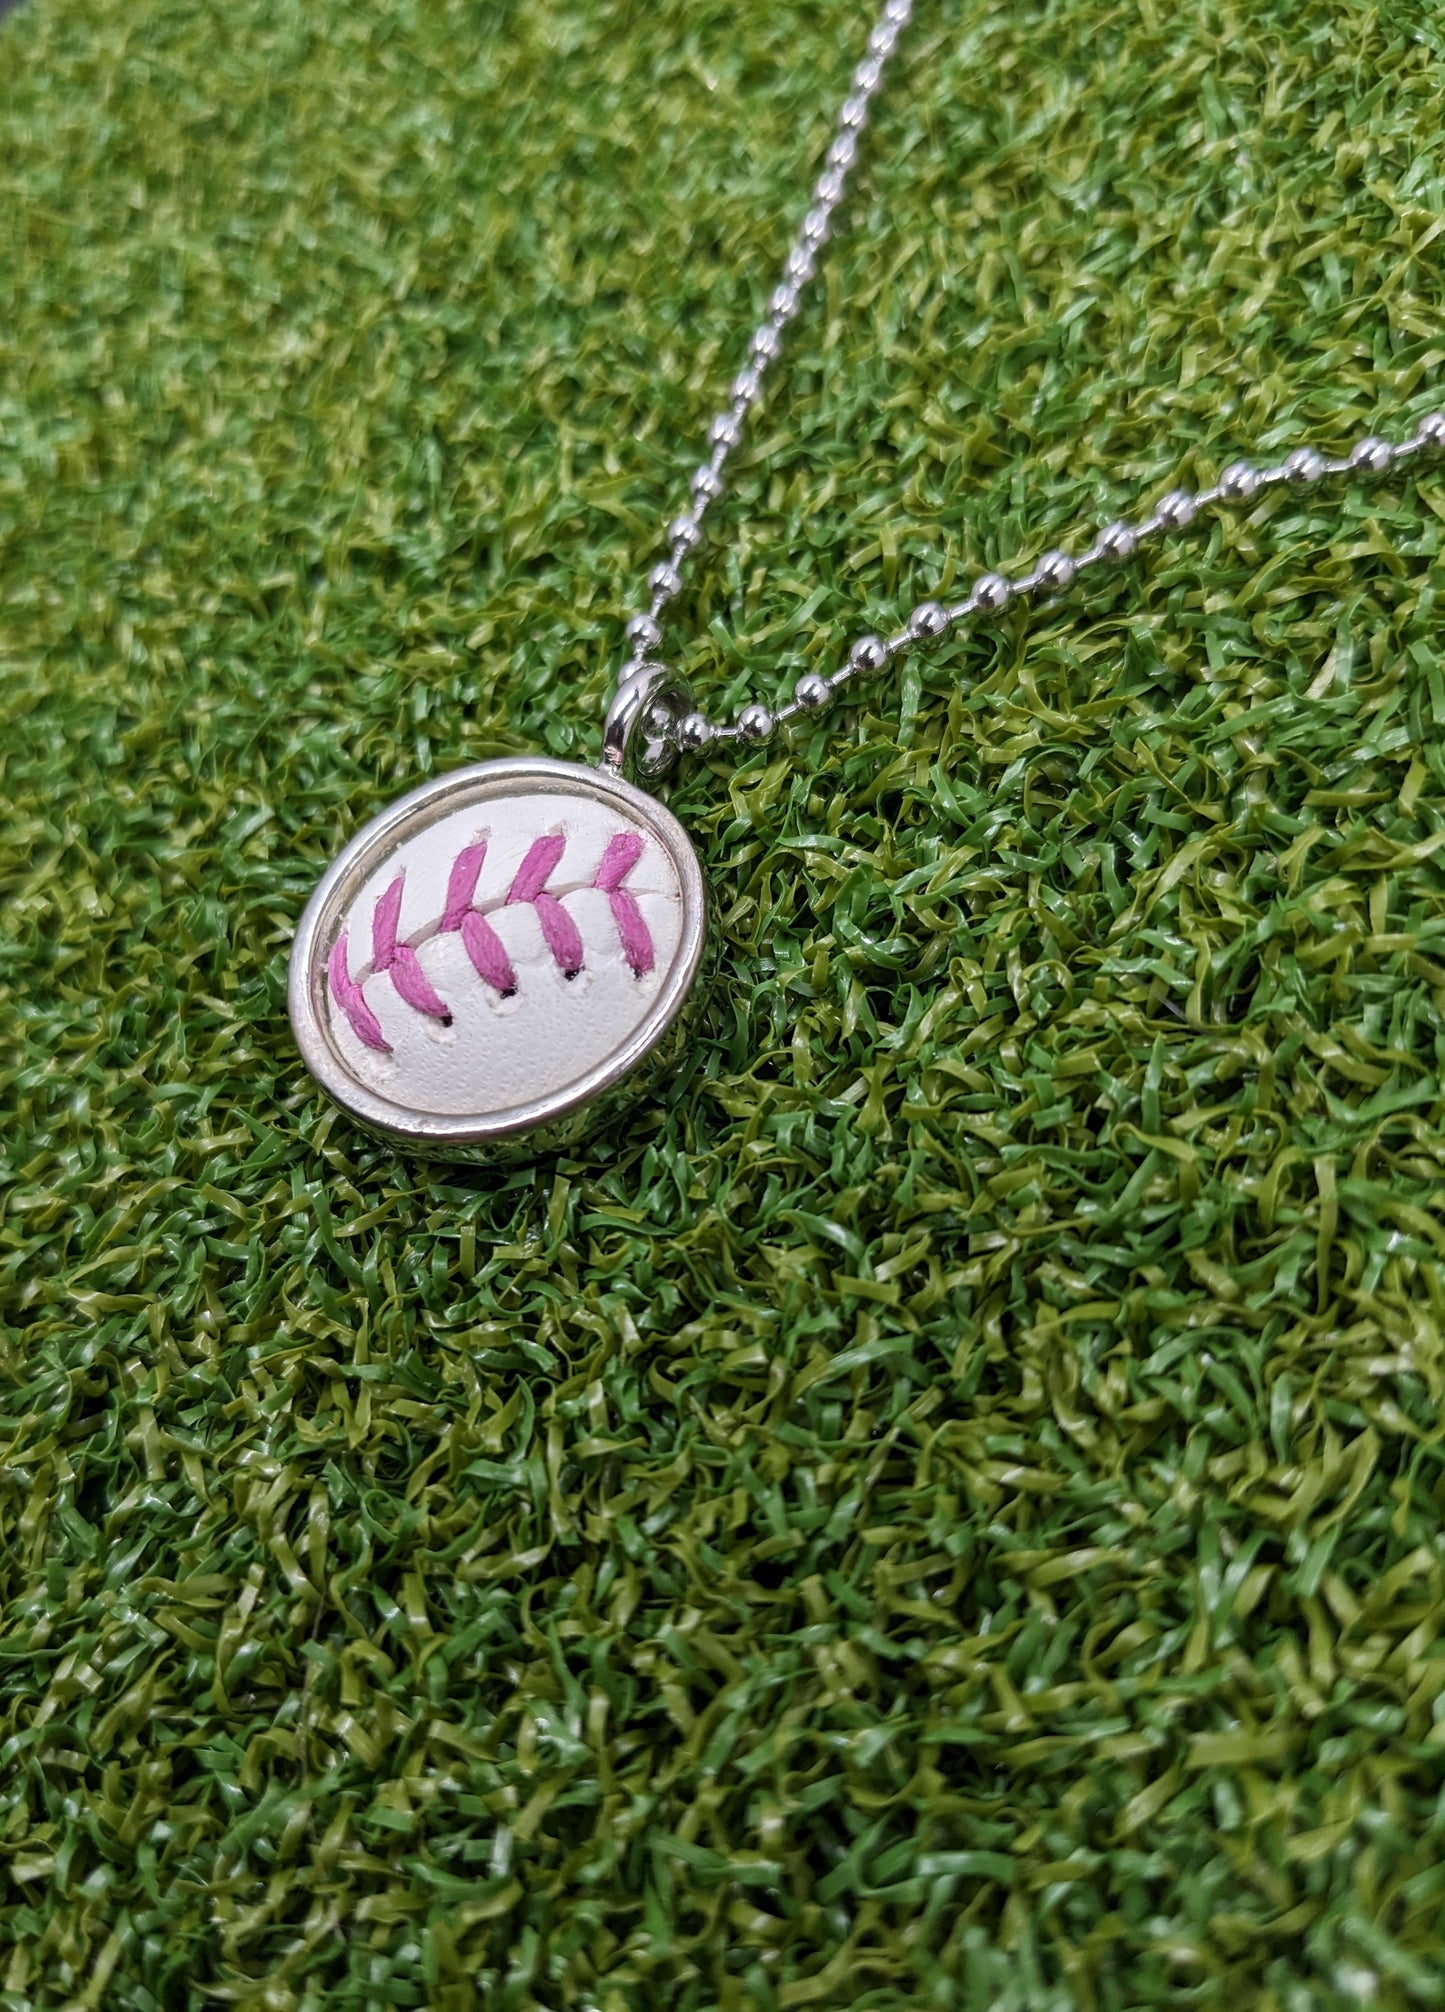 Pink Stitches - Baseball Necklace - Limited Edition